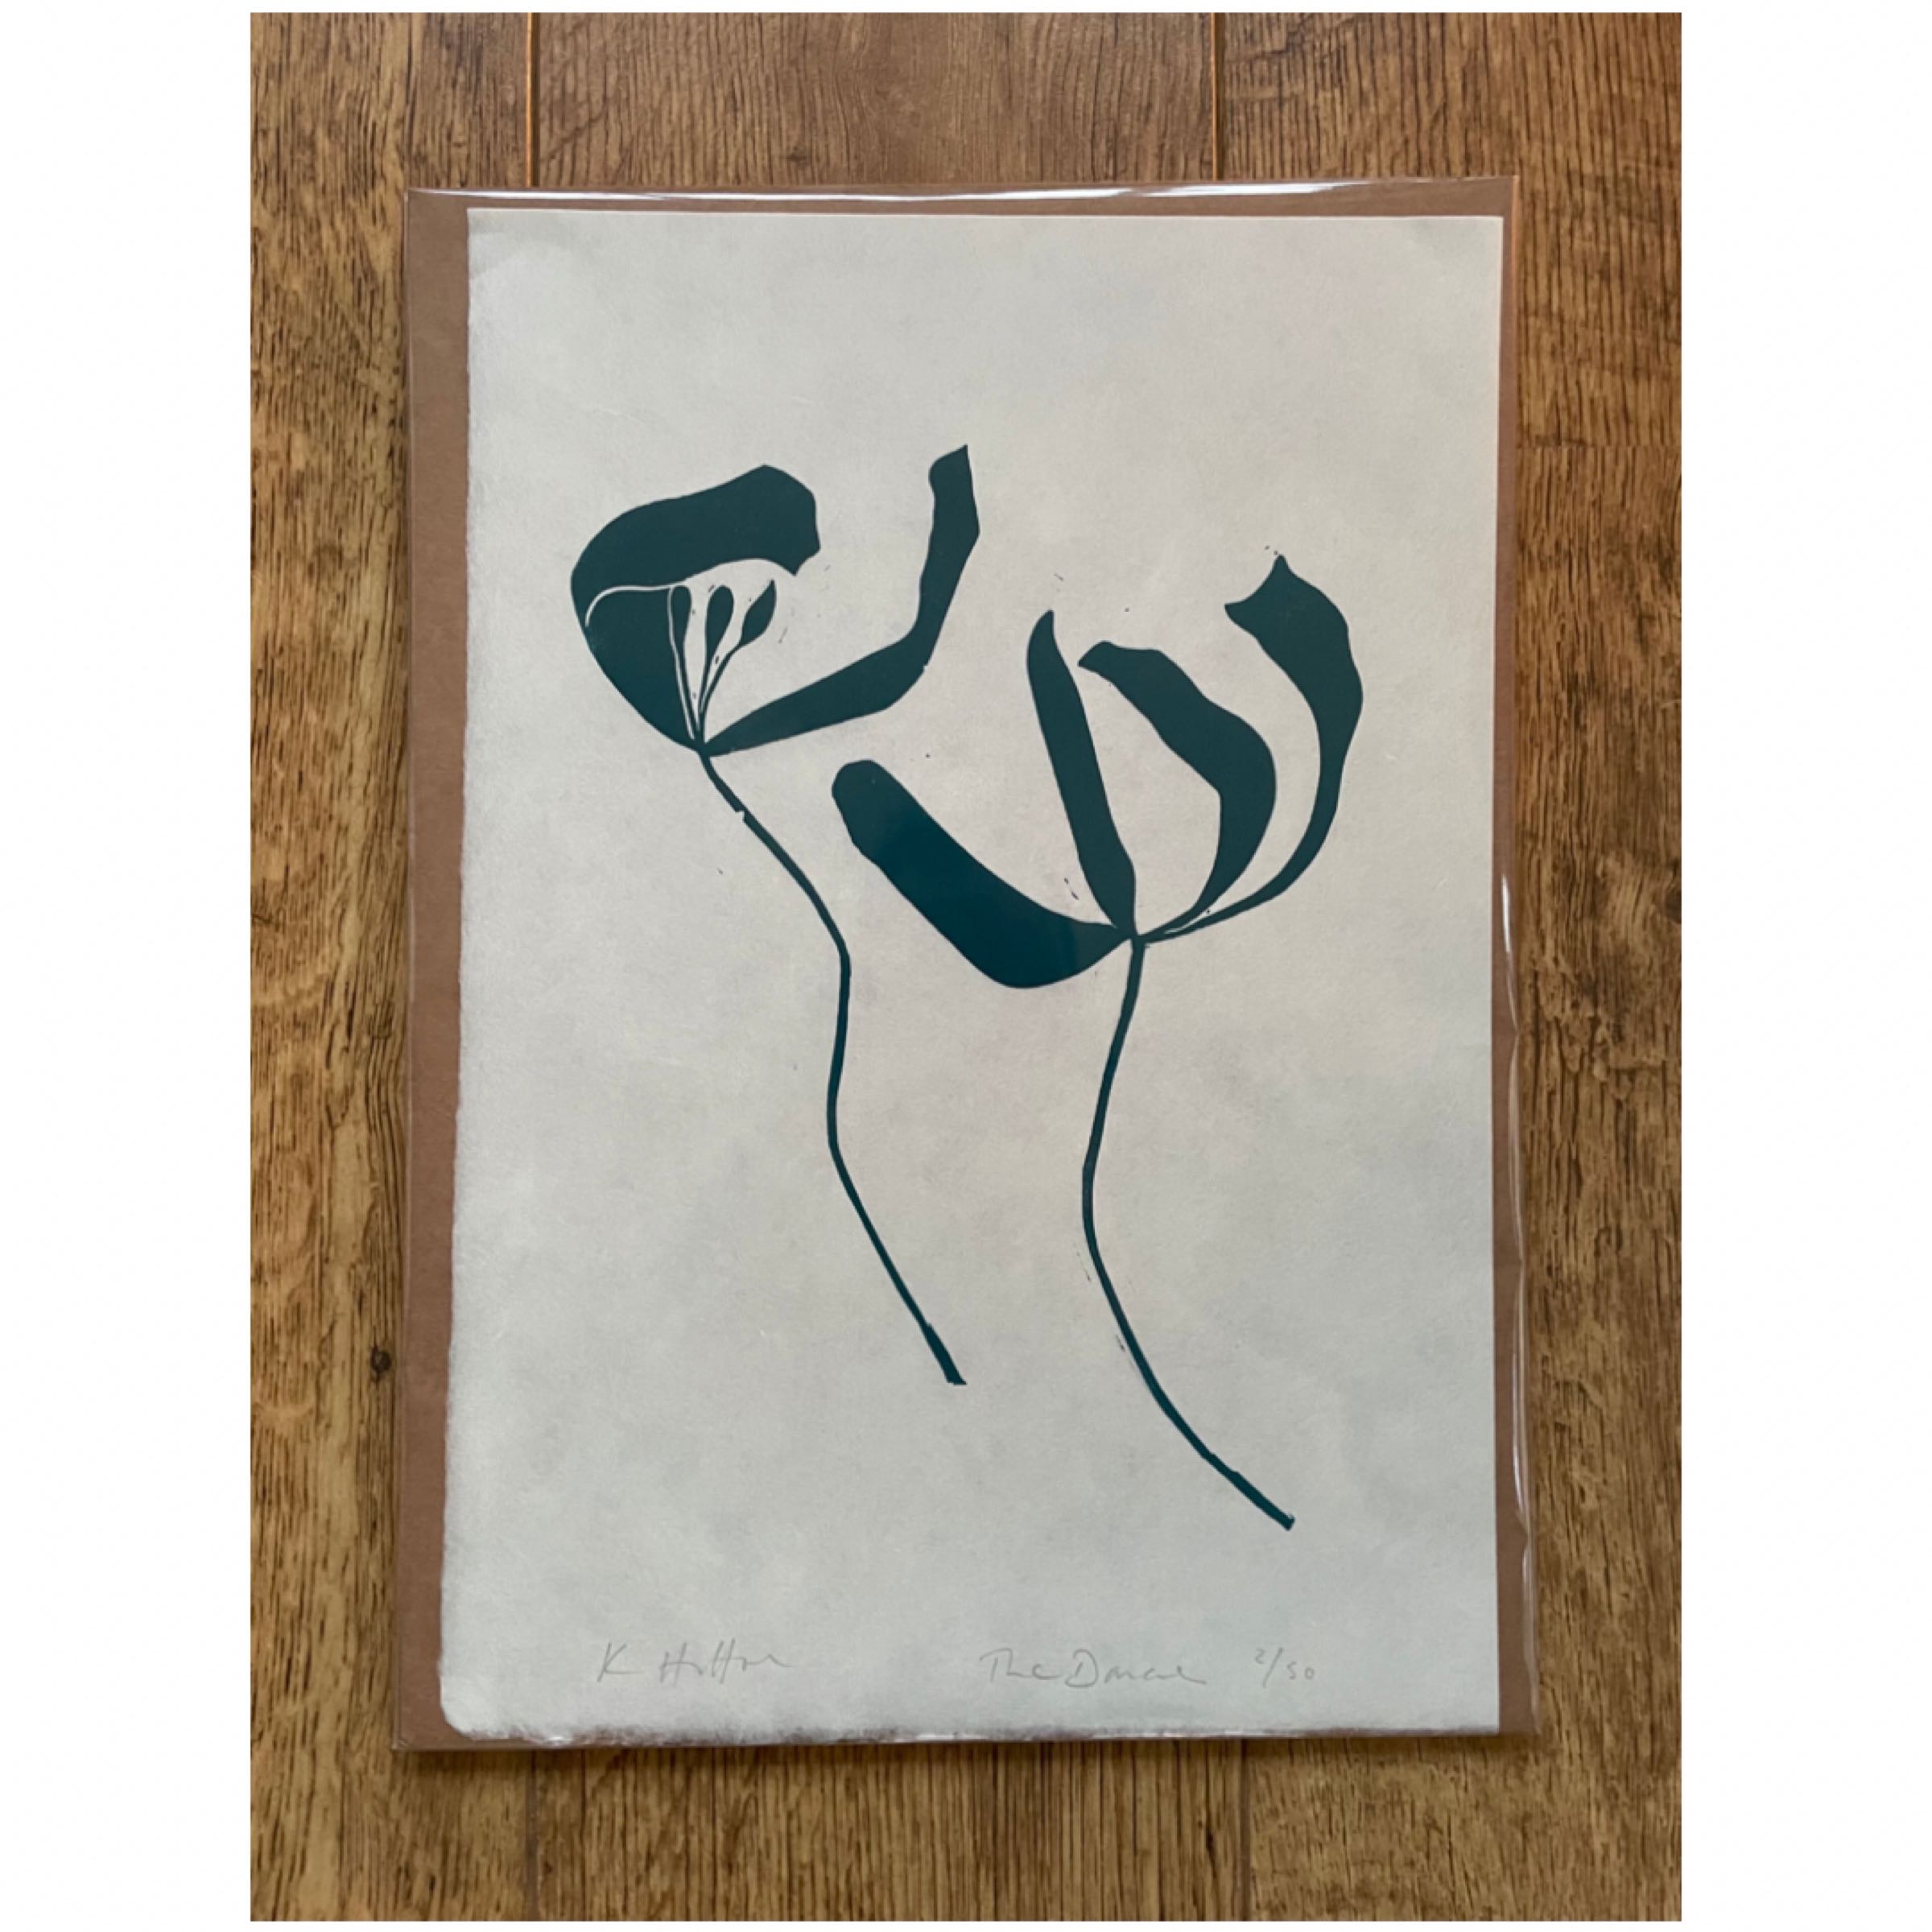 The Dance. Lino print of Two tulips in Teal by Kathy Hutton